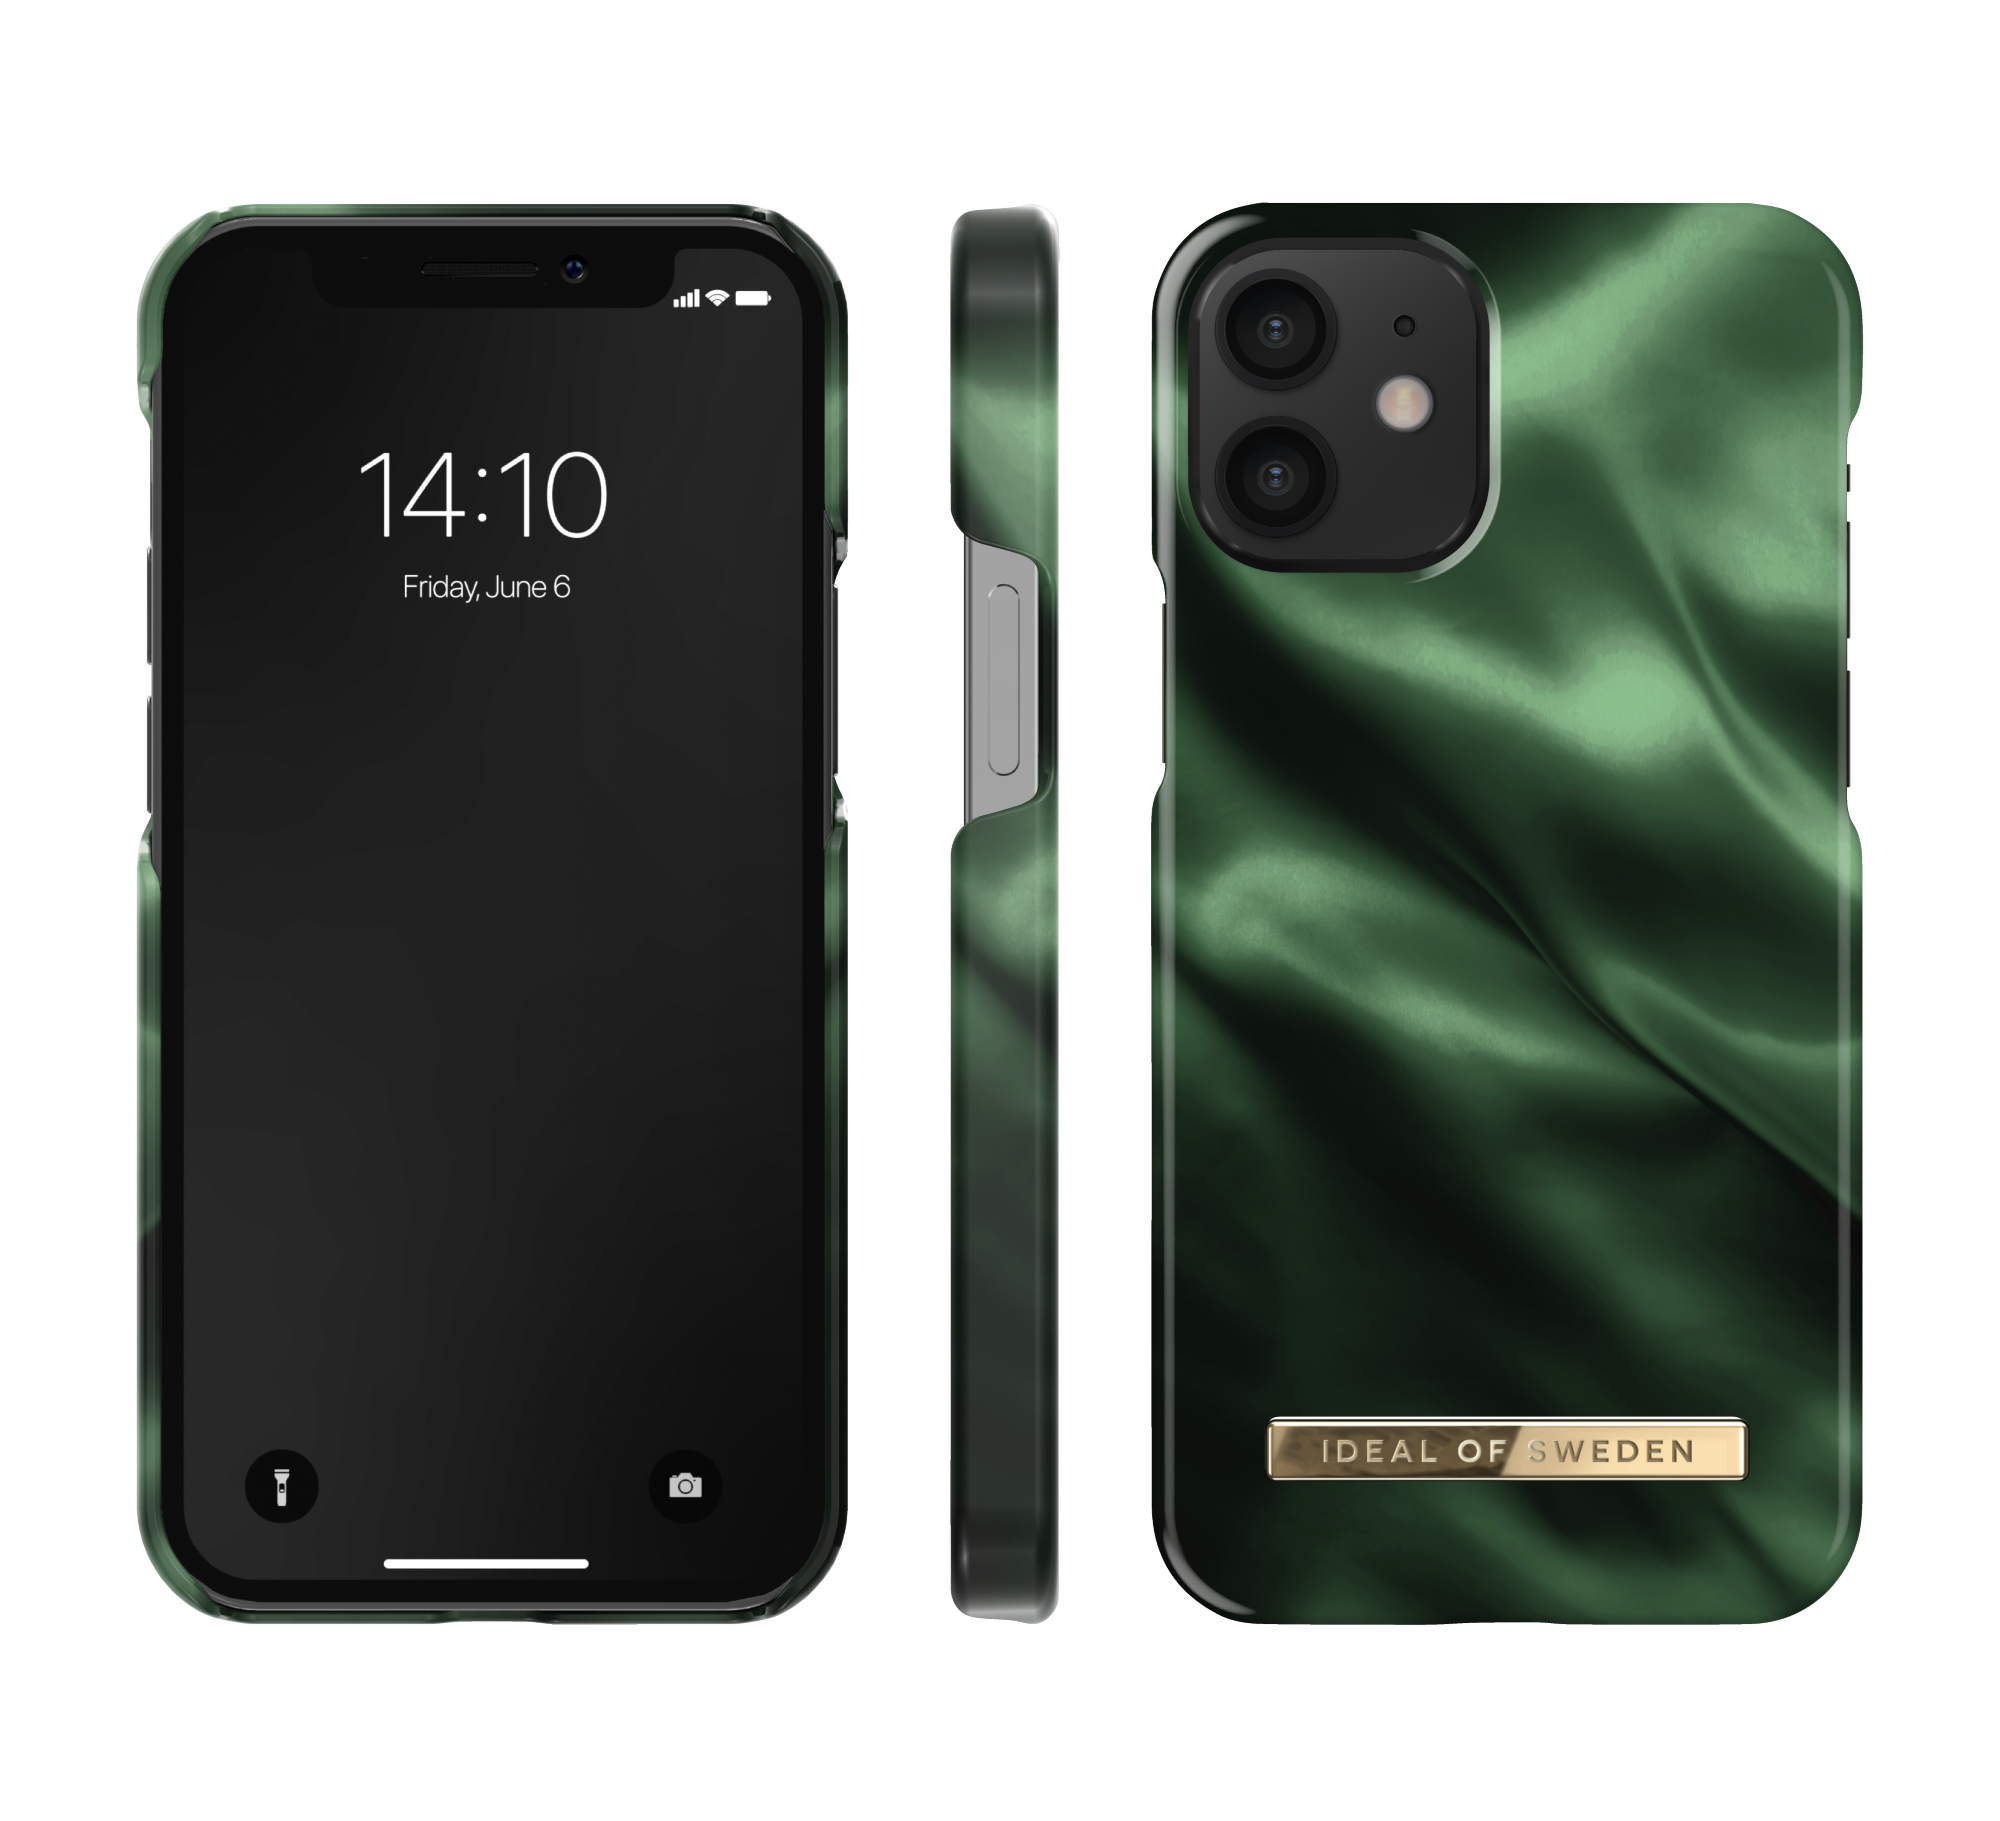 IDEAL OF SWEDEN IDFCAW19-I2054-154, Satin Backcover, Emerald Mini, 12 IPhone Apple